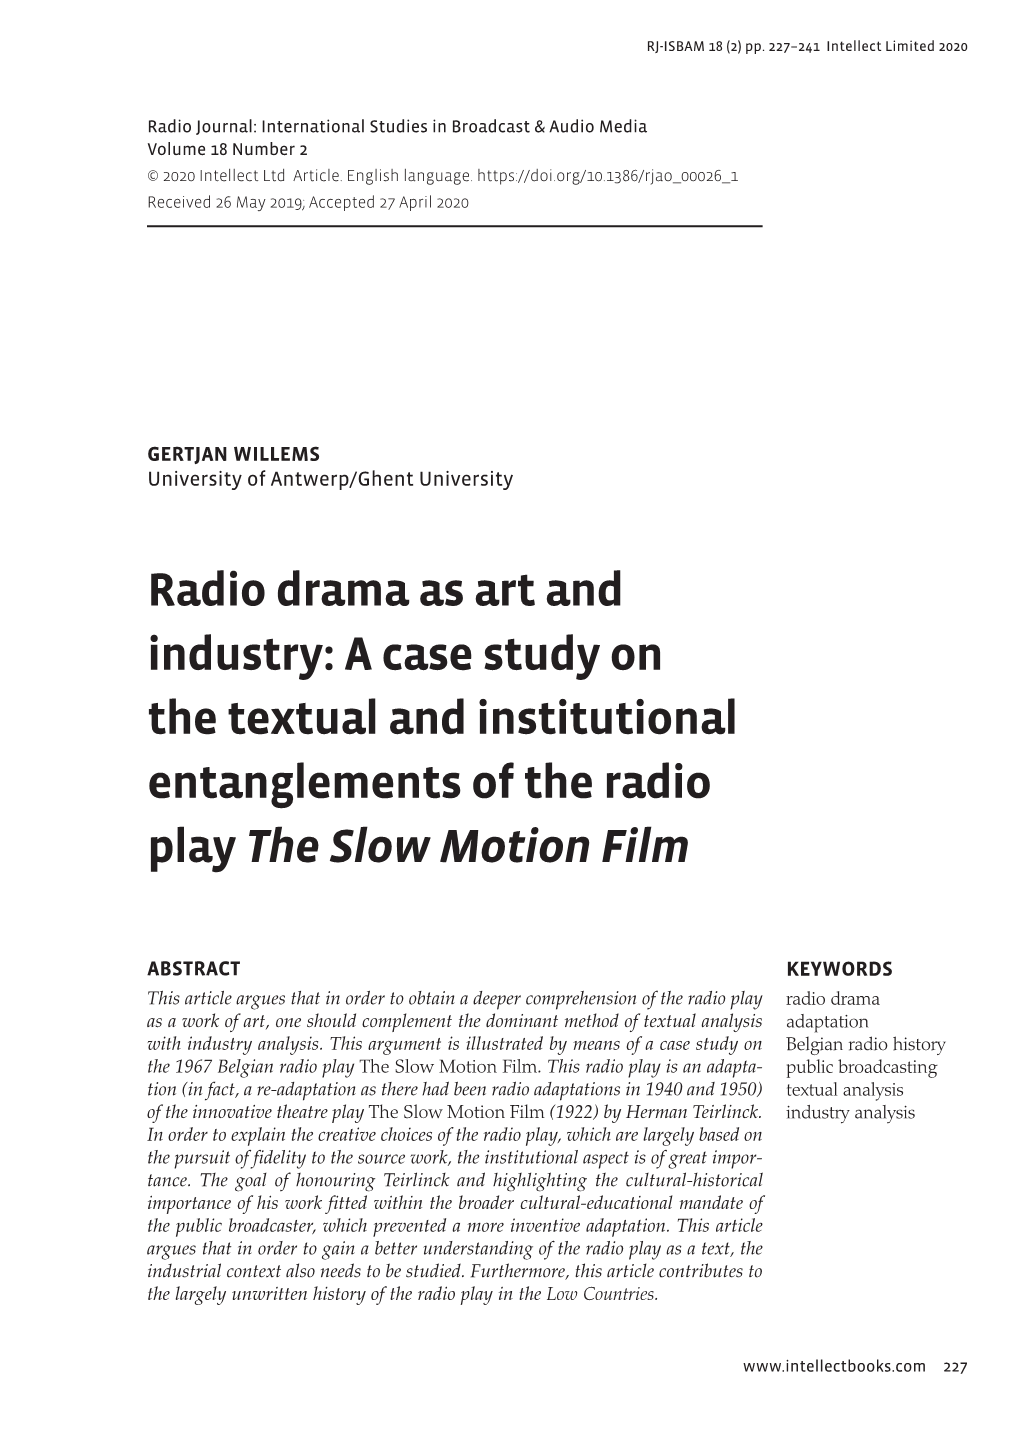 Radio Drama As Art and Industry: a Case Study on the Textual and Institutional Entanglements of the Radio Play the Slow Motion Film